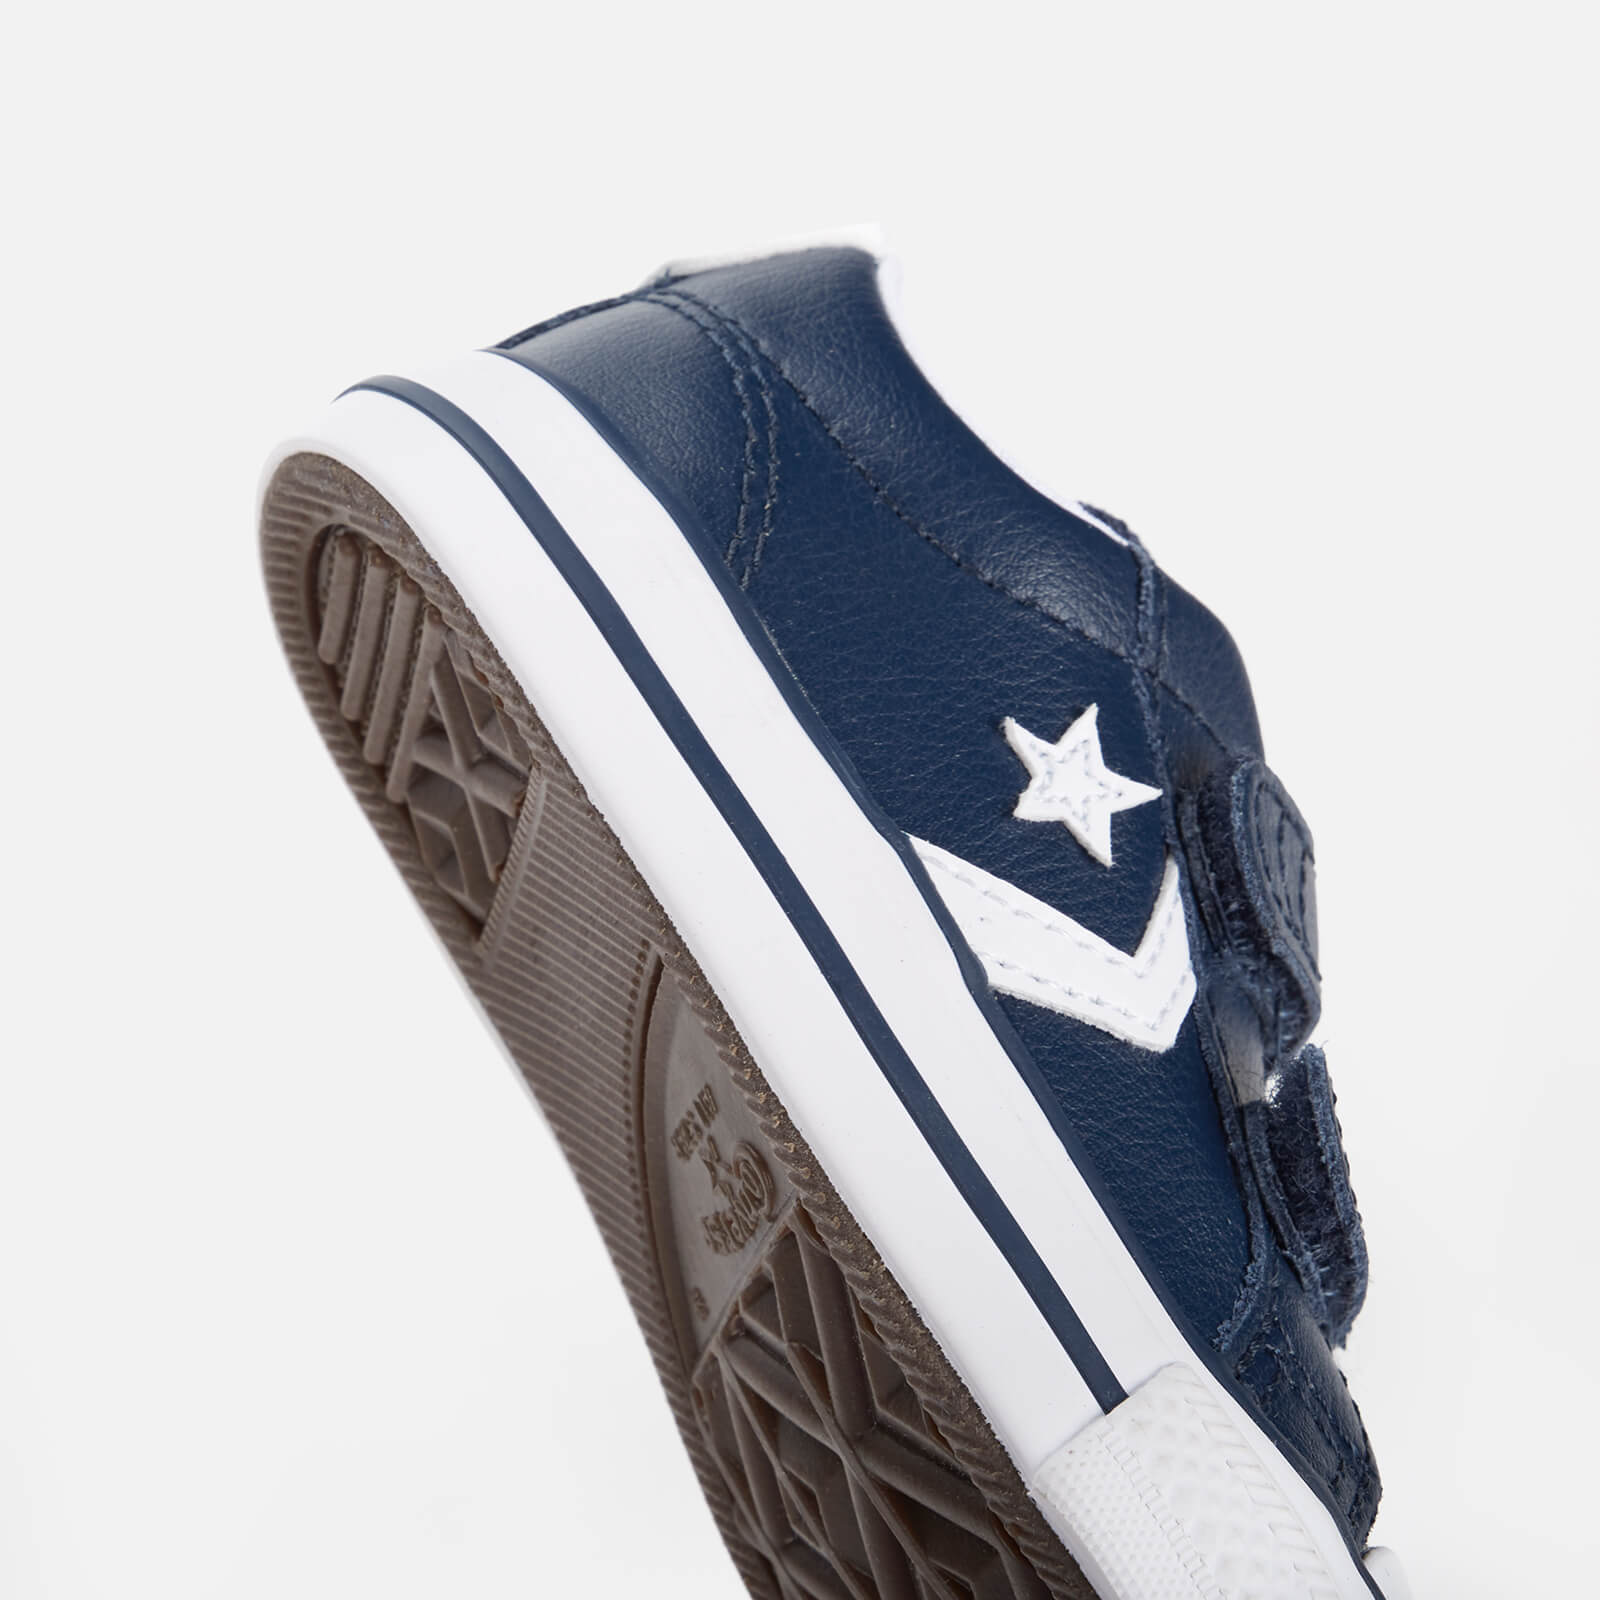 Converse Toddlers' Star Player V2 Trainer - Navy/white - Uk 7 Toddler 746139c Childrens Footwear, Blue